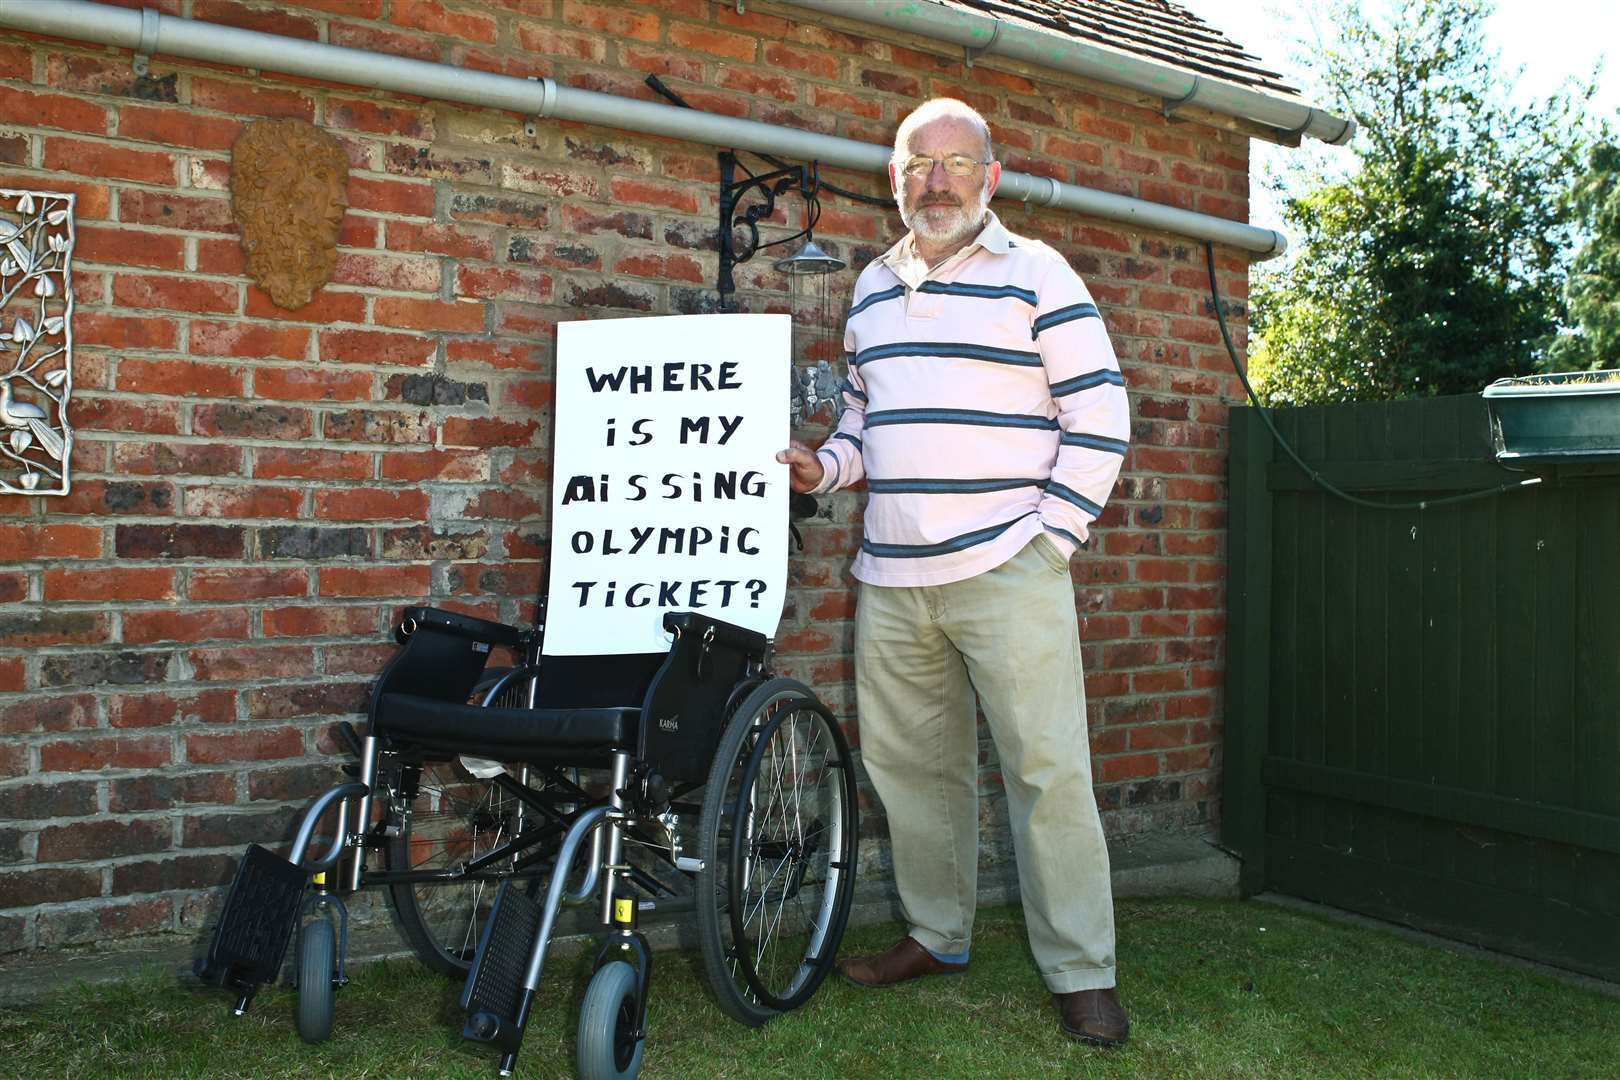 William Booth with a wheelchair and sign he held up during the Olympic torch relay. He had forked out £900 to see Michael Phelps at the Aquatics Centre but hadn't received a ticket